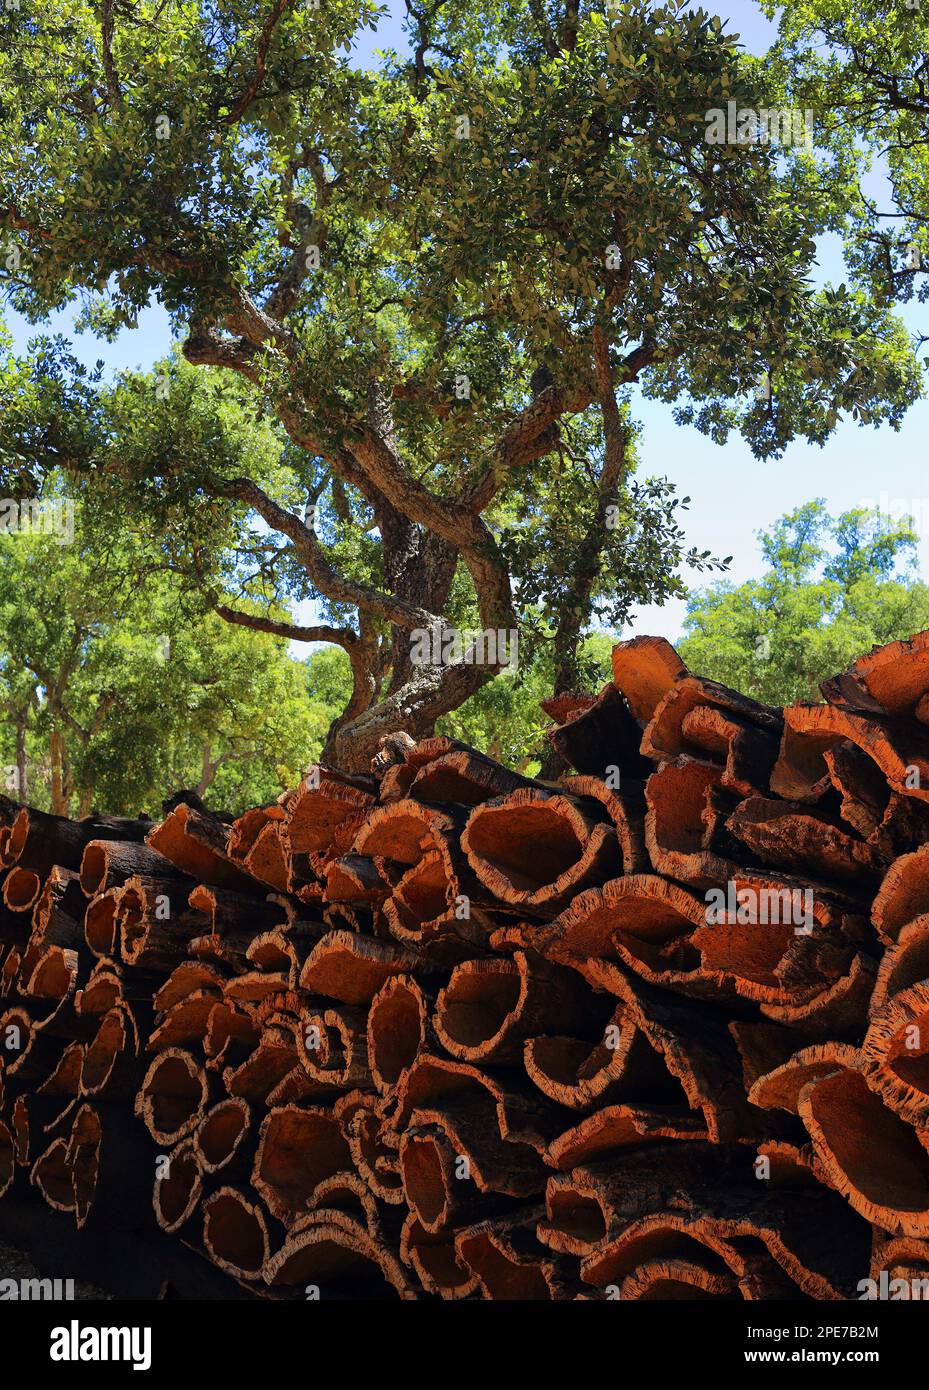 Portugal, Alentejo region. Newly harvested cork oak bark drying in the sunshine. (unprocessed cork) Natural, sustainable resource. Stock Photo